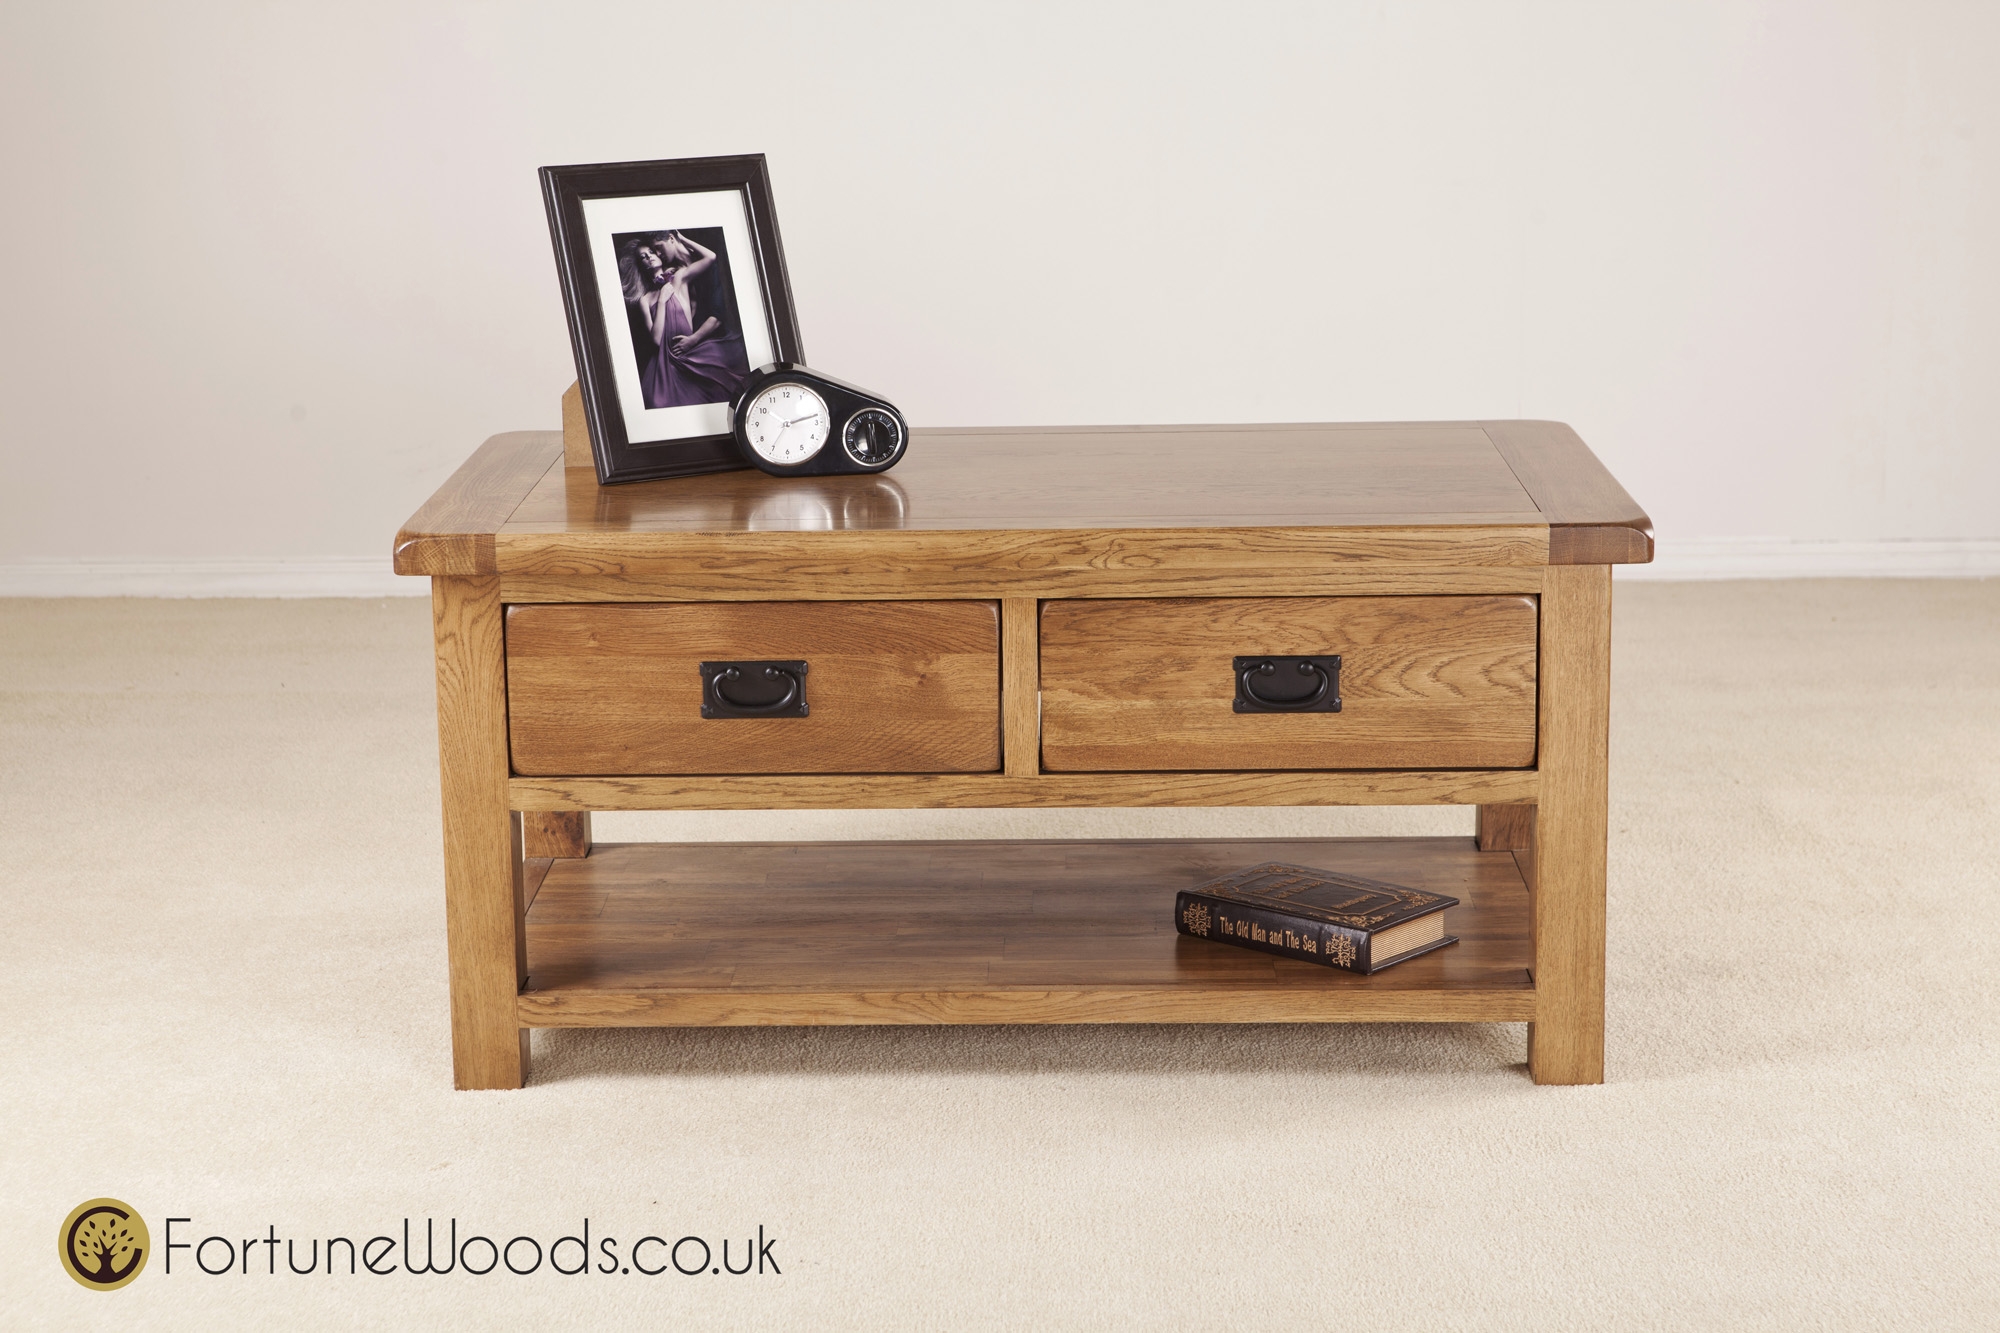 Fortune Woods Rustic Coffee Table With Drawers